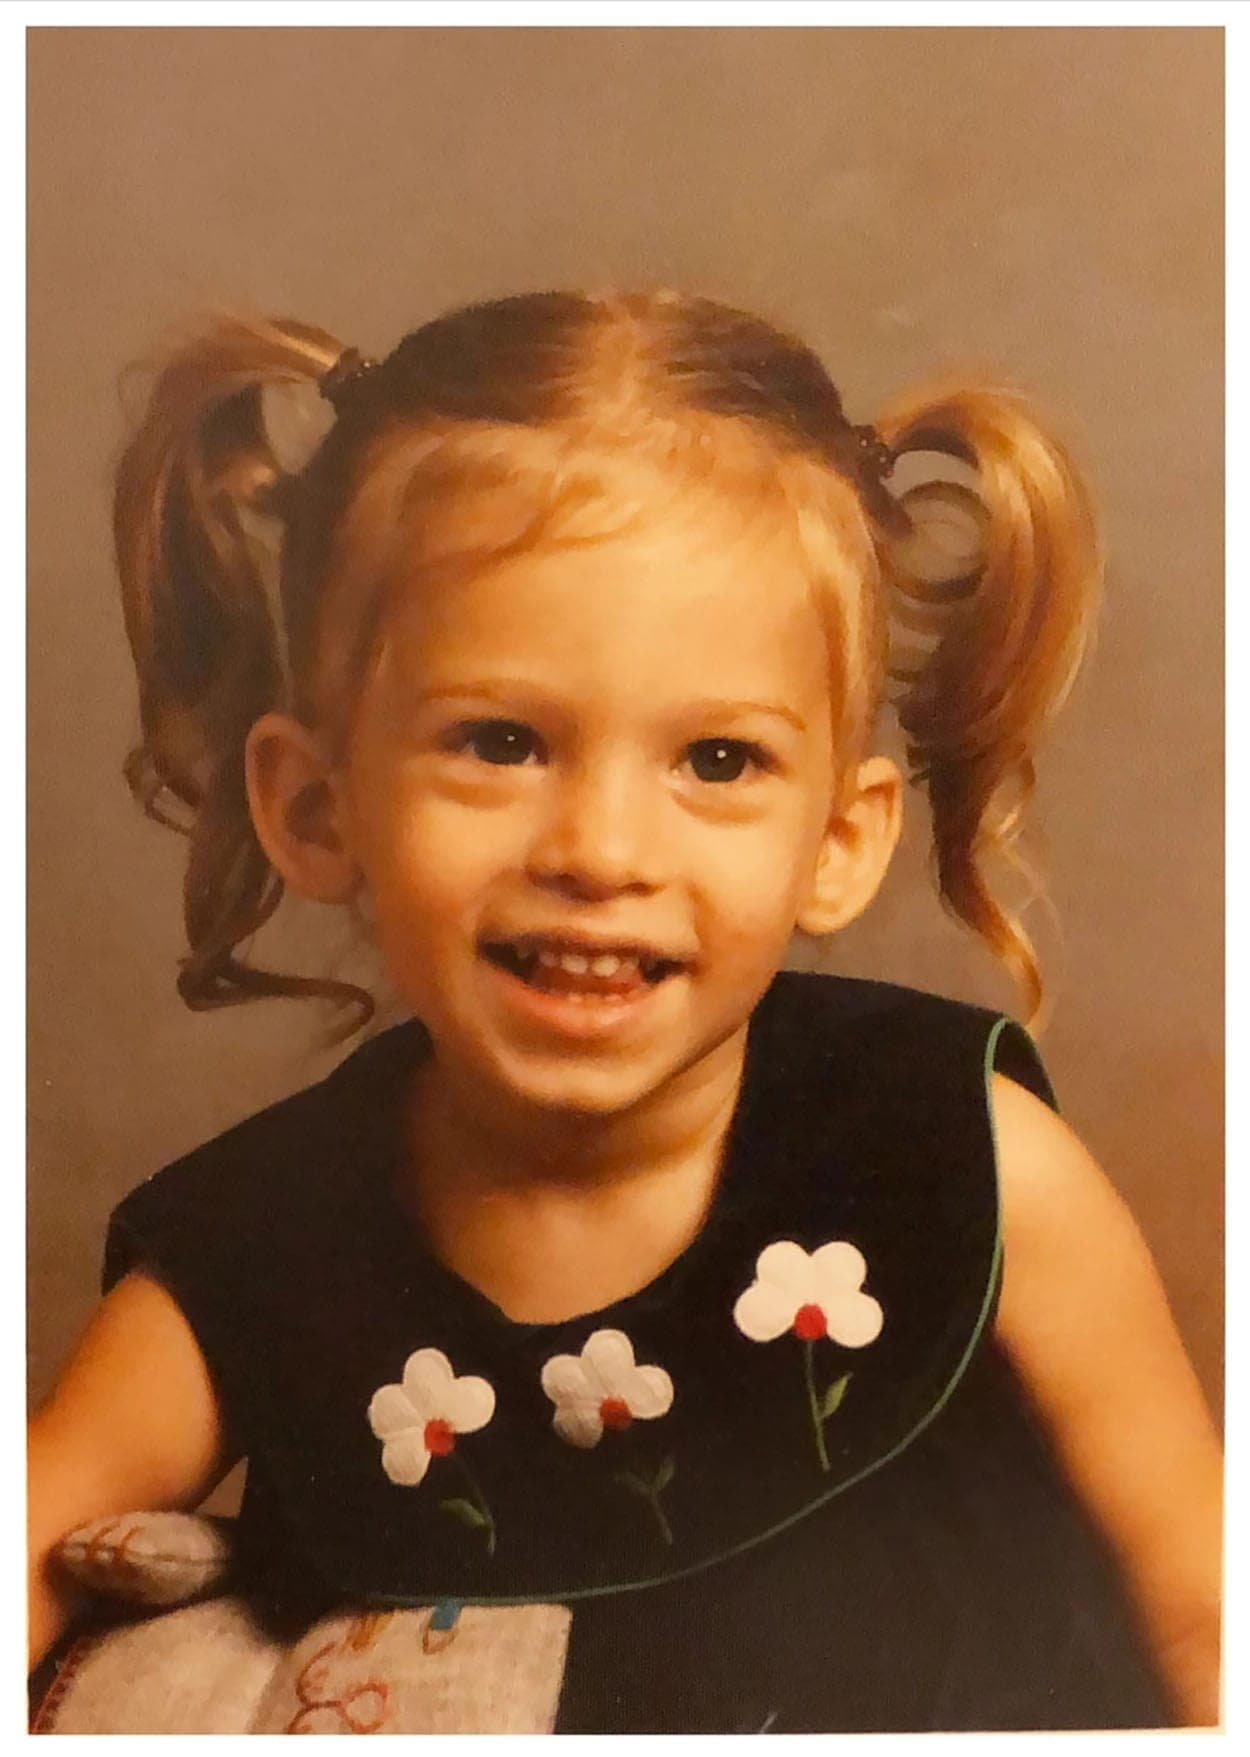 Bea, Founder and Social Media Strategist at age 4.